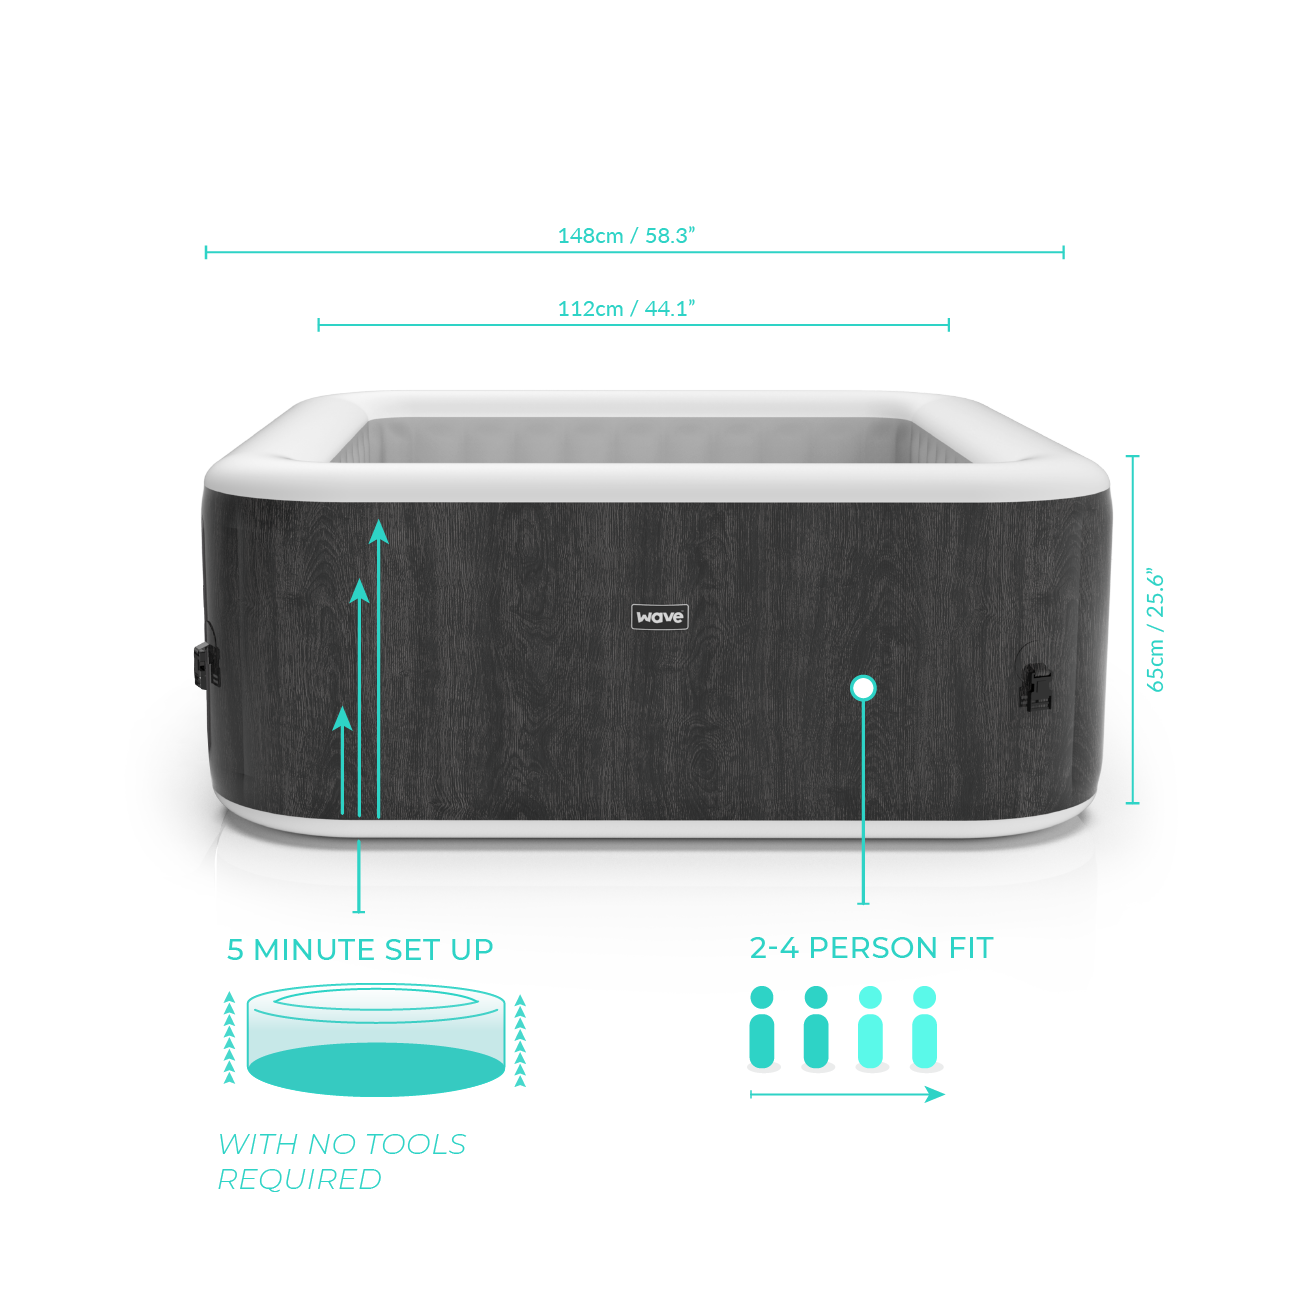 Wave Spa 4 Person Grey Wood External Liner - Body Replacement - Wave Spas Inflatable, foam Hot Tubs